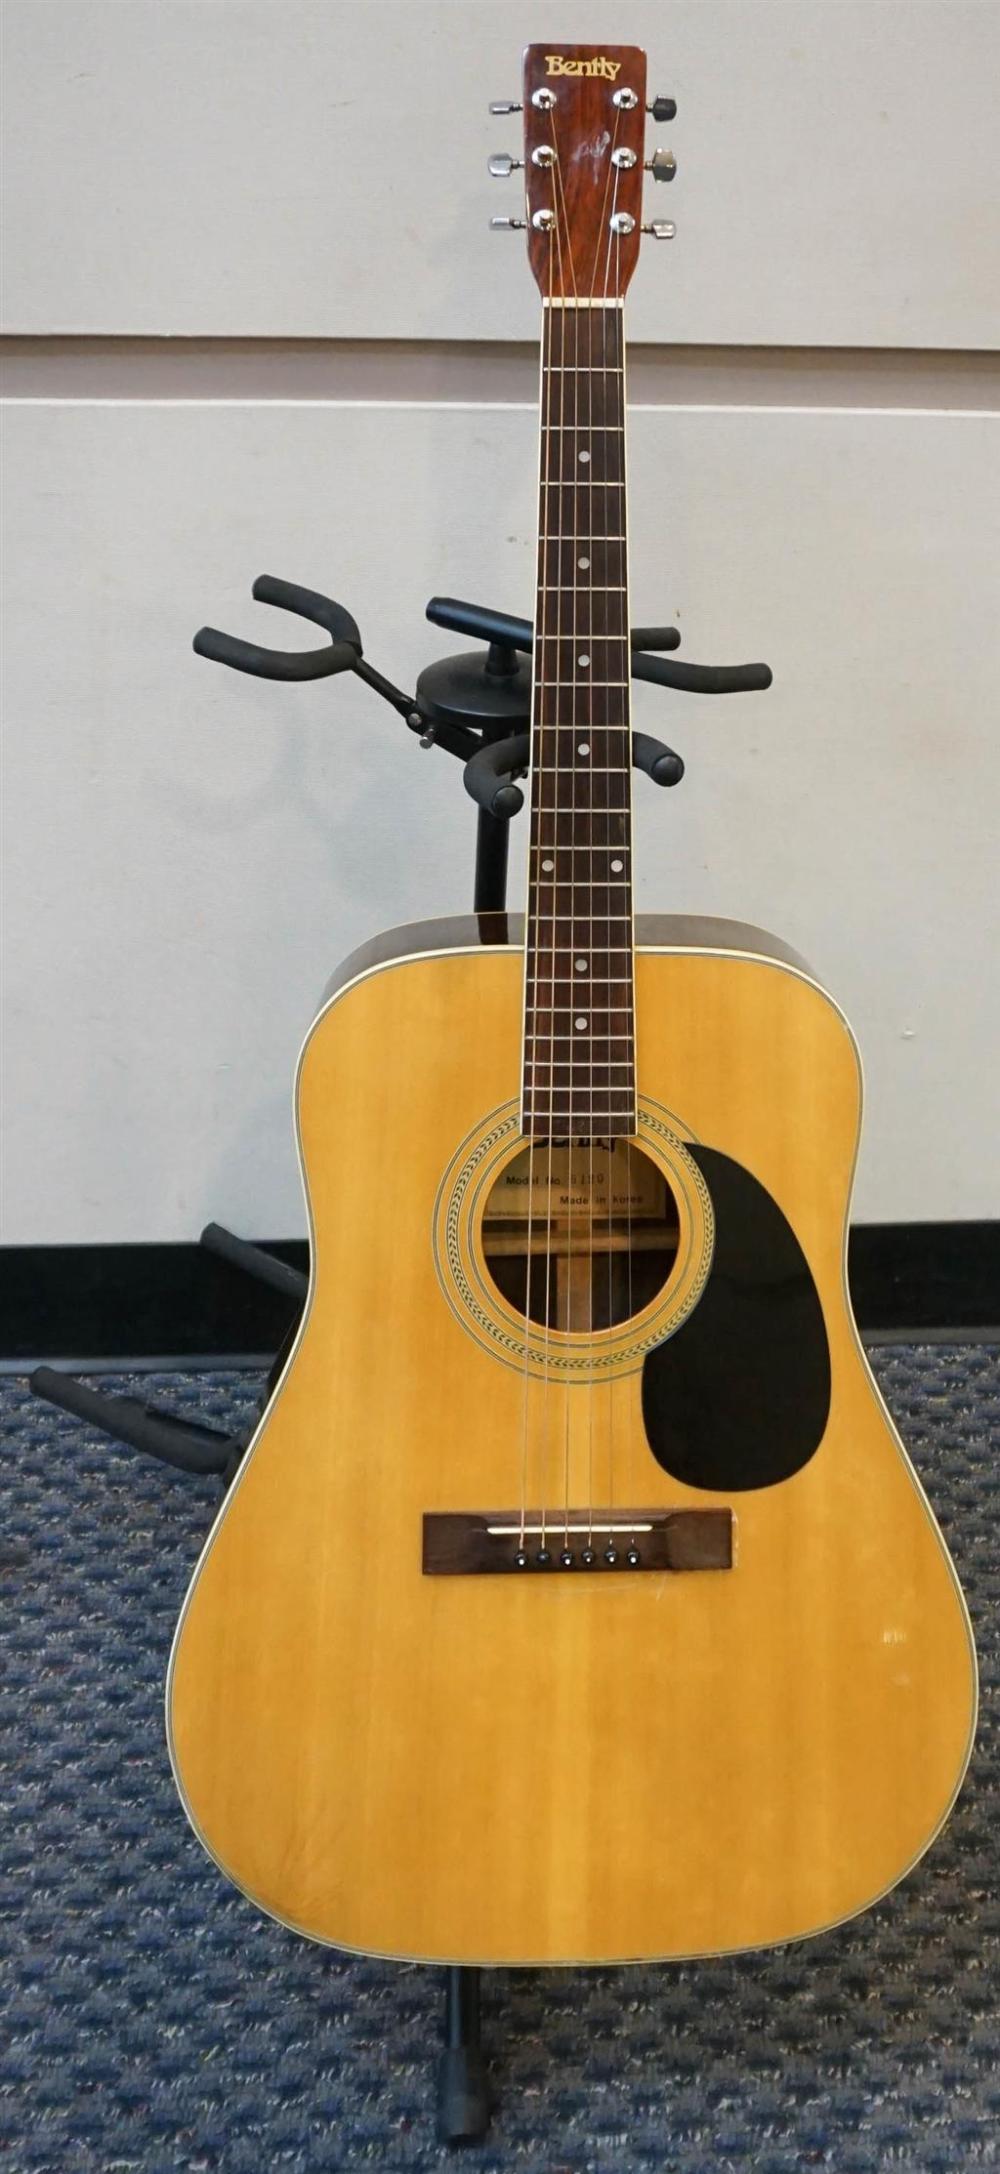 BENTLY MODEL 5120 GUITAR WITH STANDBently 3262ca